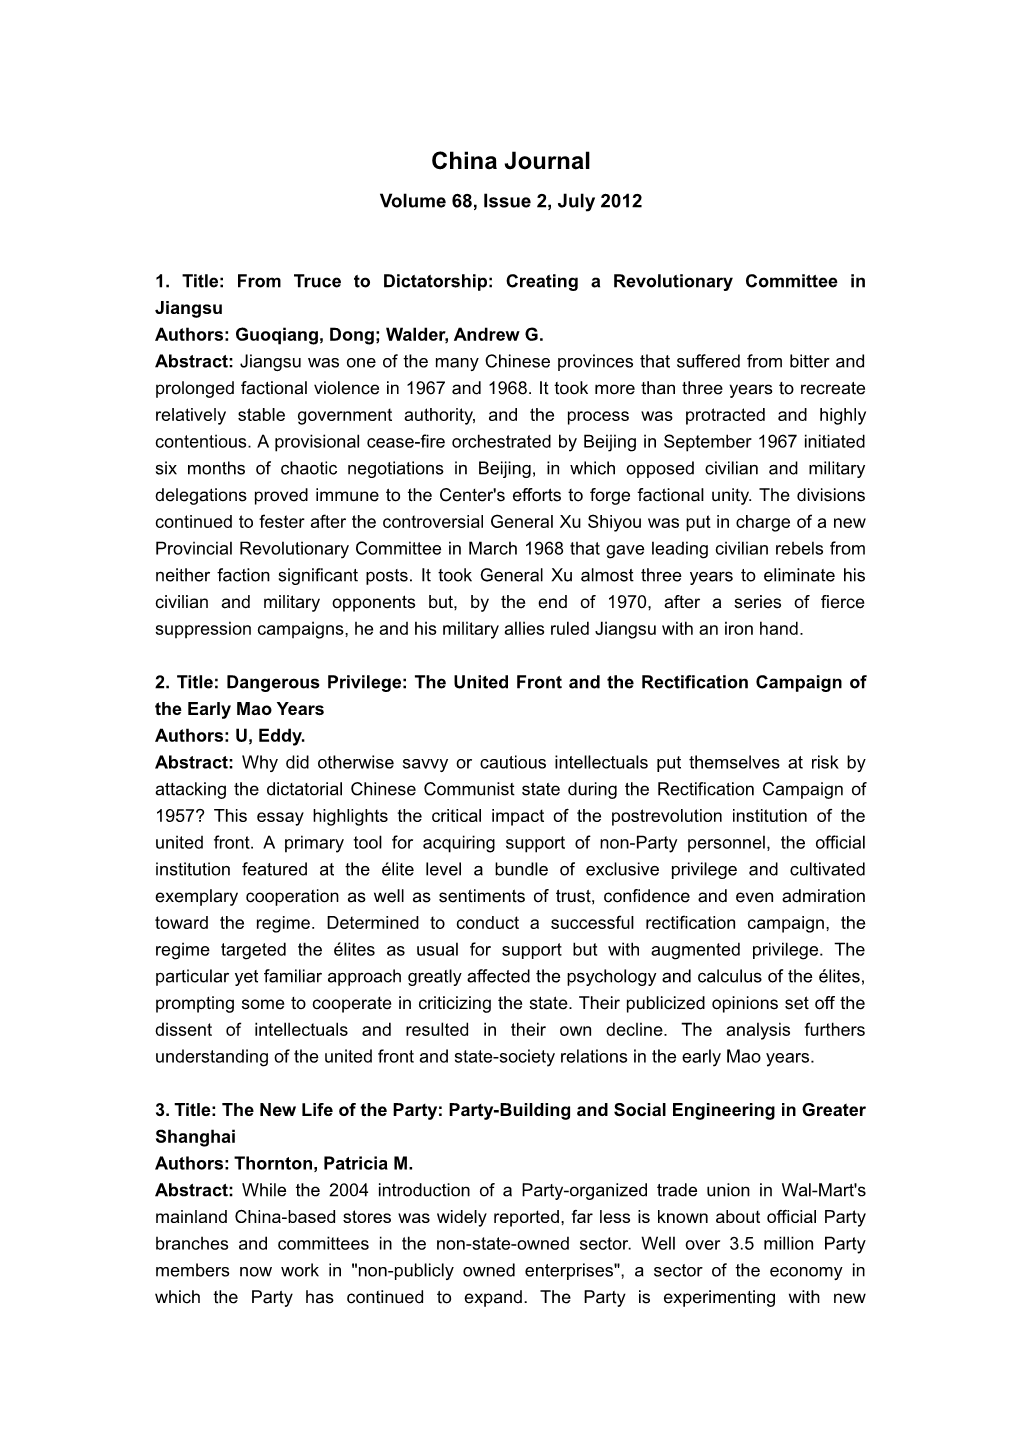 1. Title:From Truce to Dictatorship: Creating a Revolutionary Committee in Jiangsu